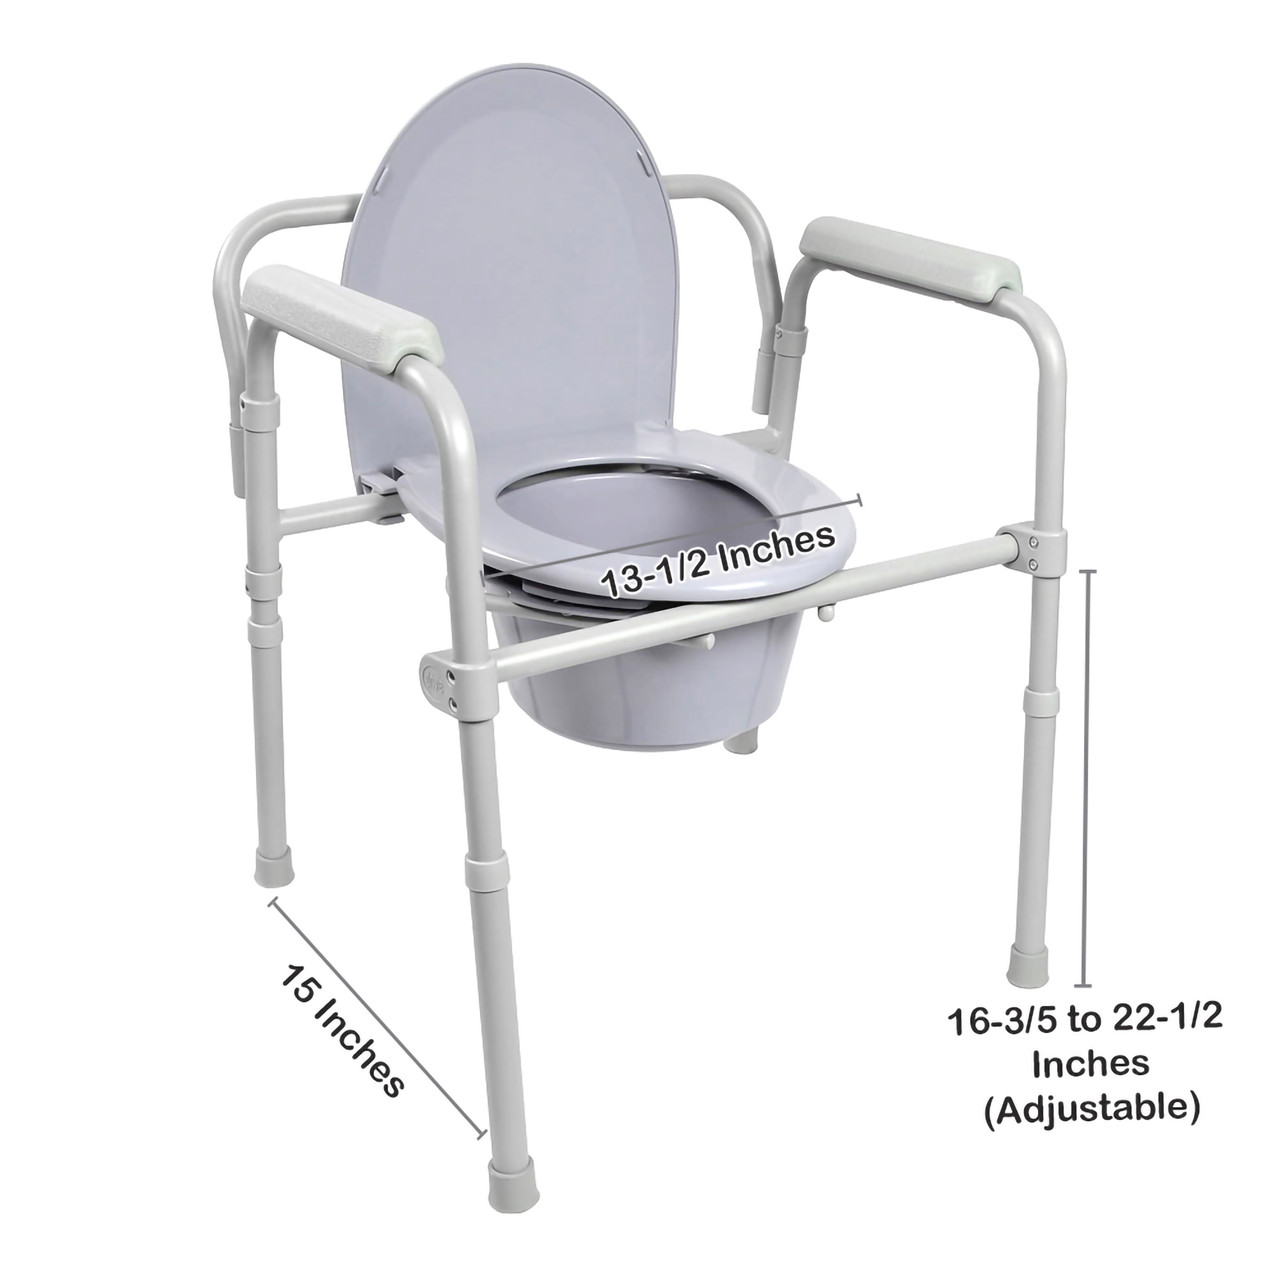 McKesson Commode Chair Portable Toilet with Bucket - 350 lbs